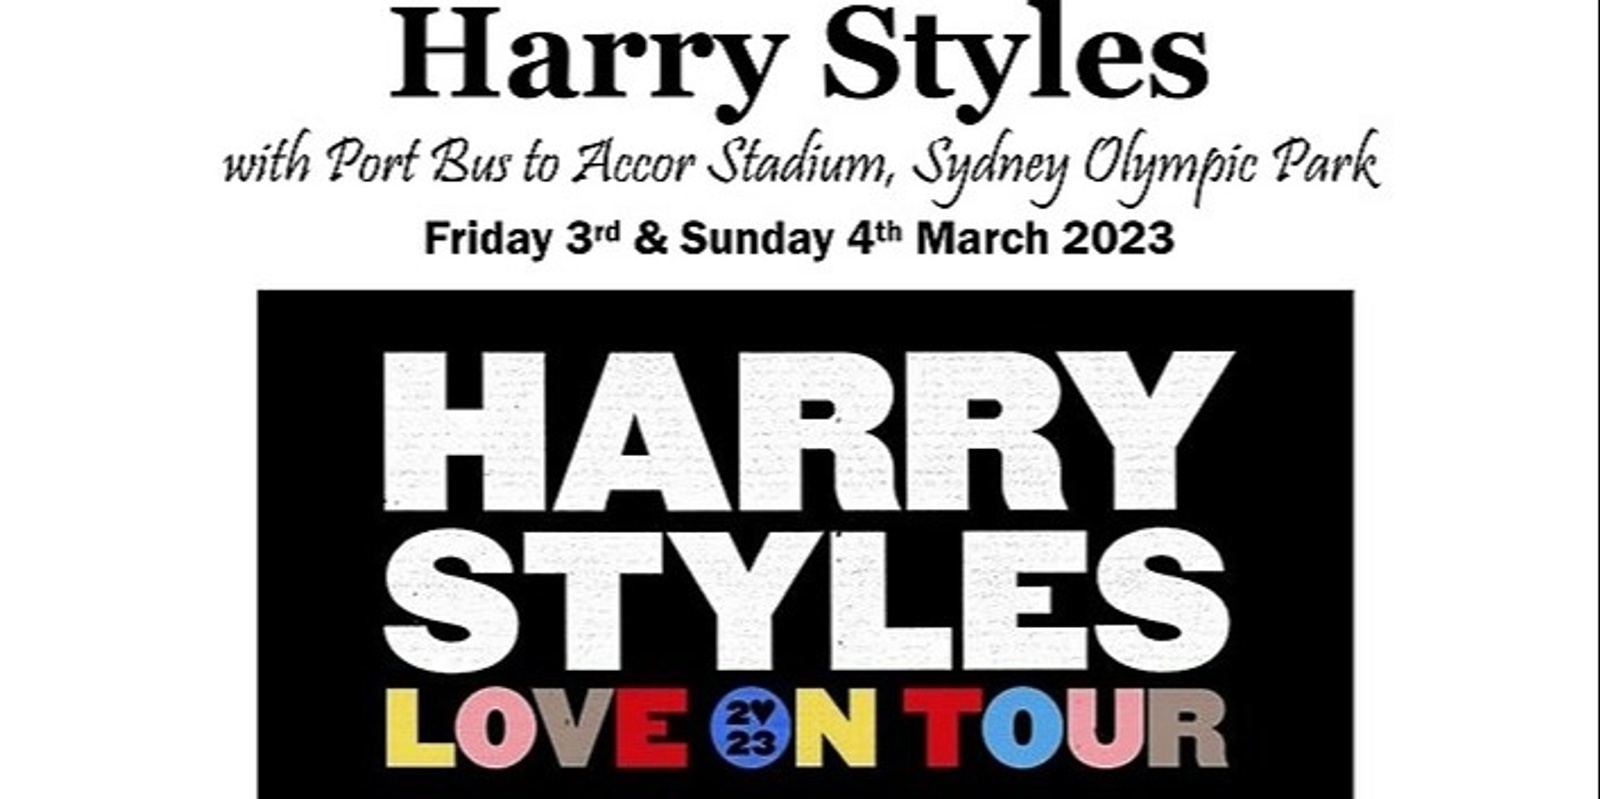 Banner image for Harry Styles with Port Bus